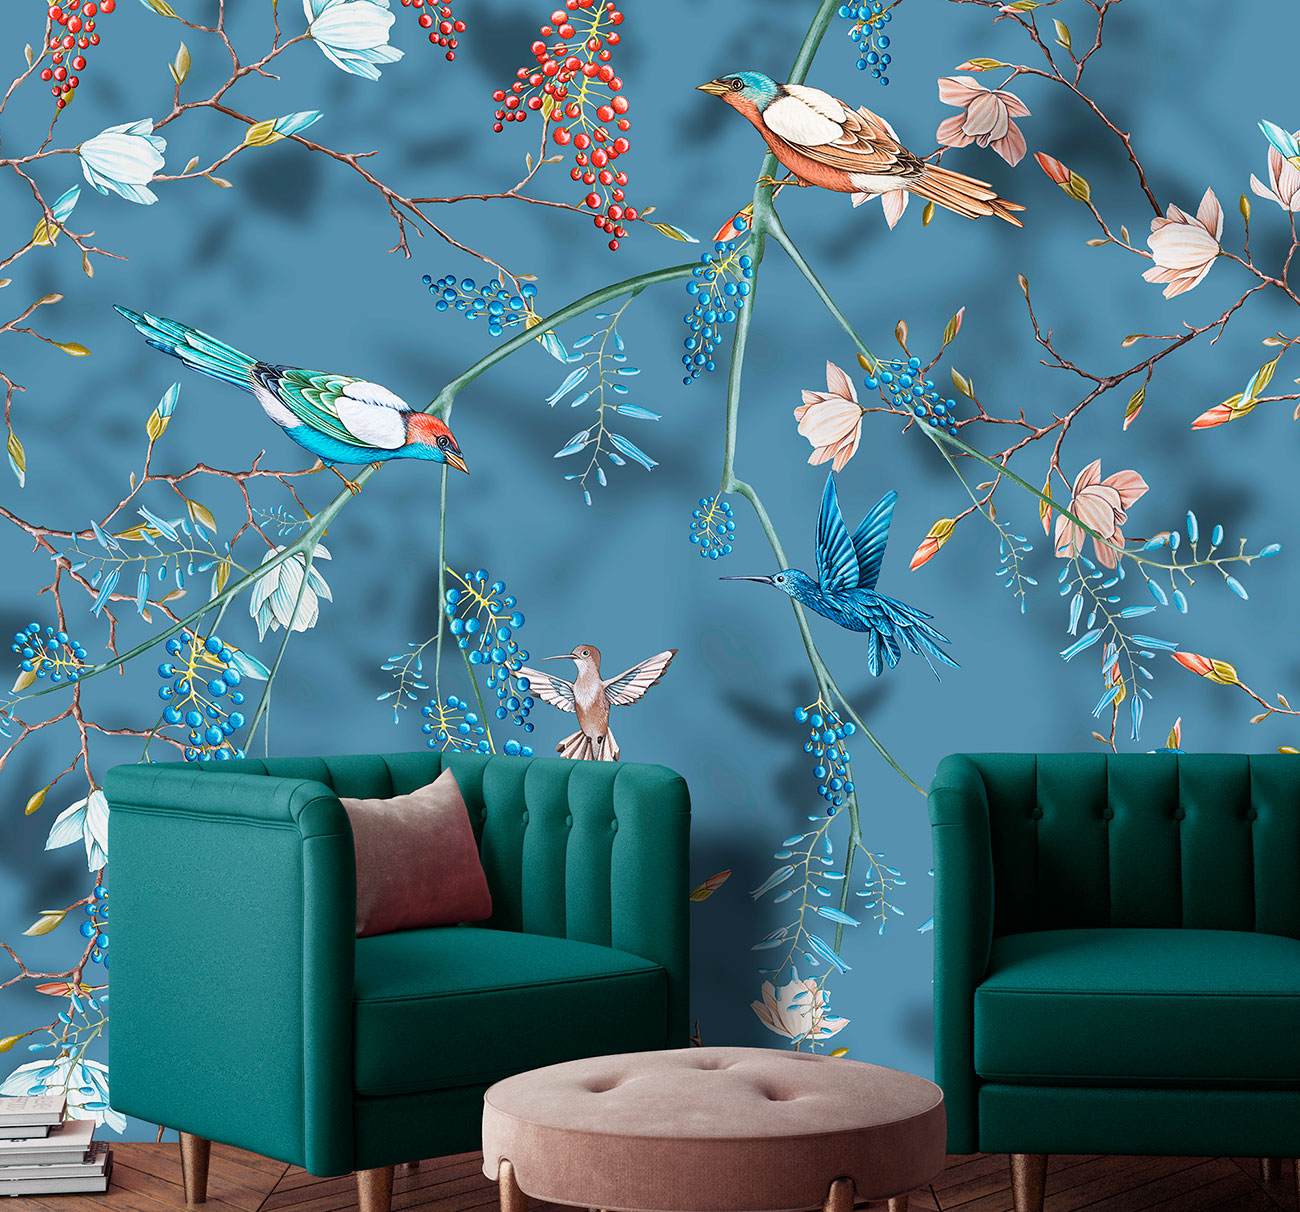 Floral 3D effect wallpaper, with hand-painted tropical flowers and birds on a blue background